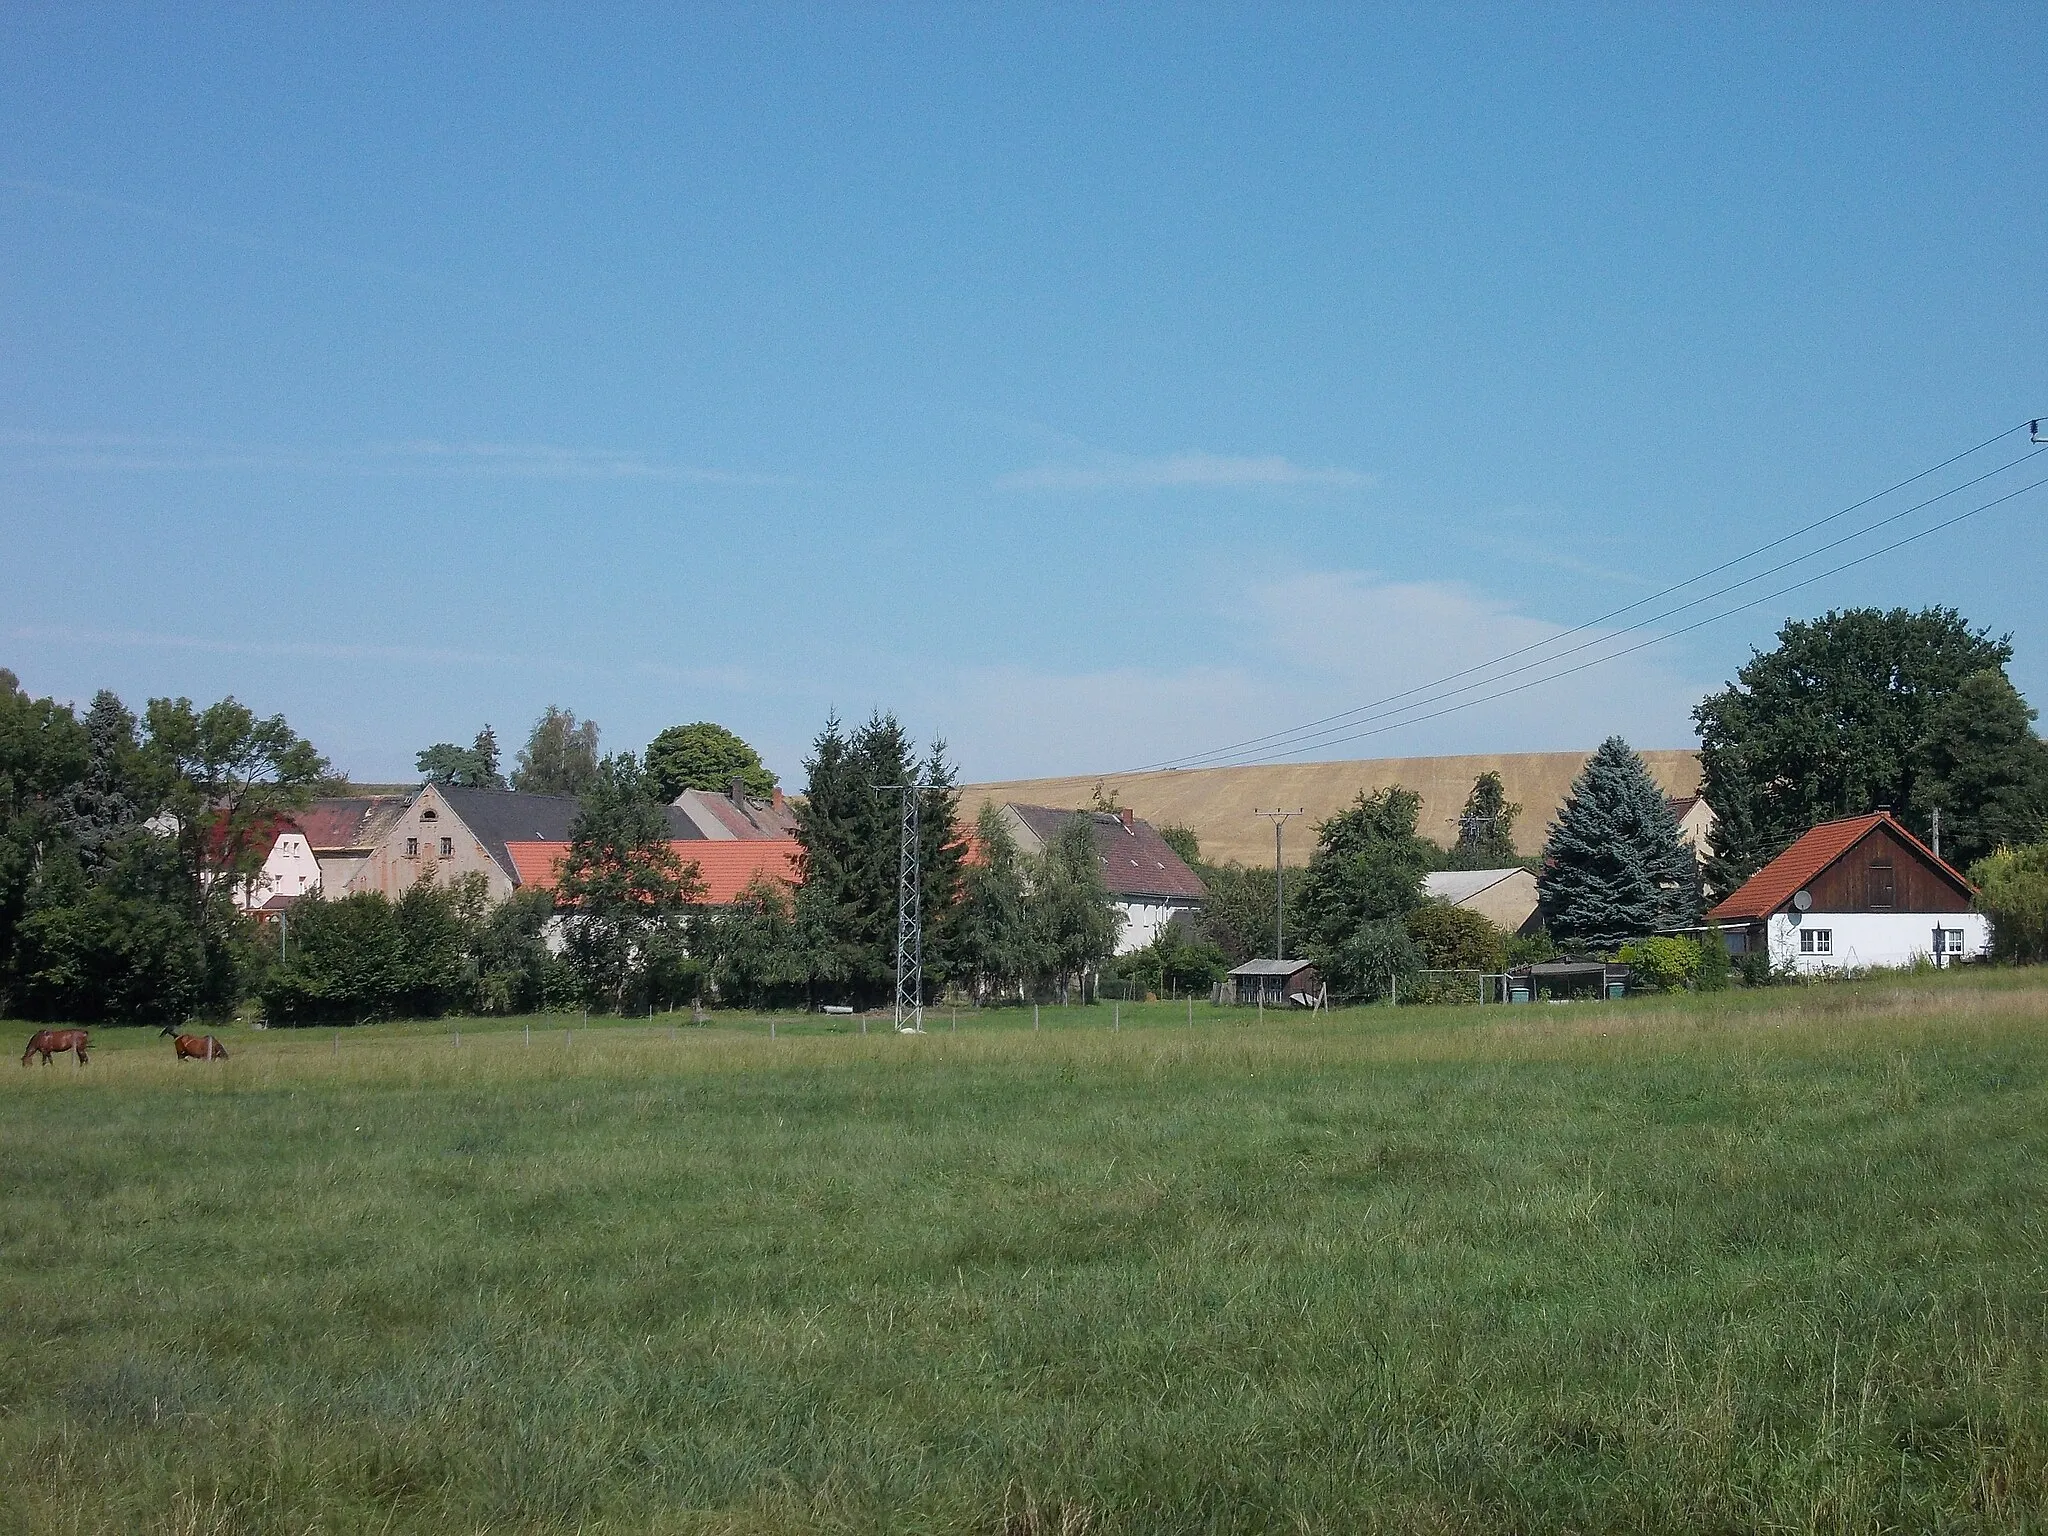 Photo showing: The village of Ostrau (Grimma, leipzig district, Saxony) from the south